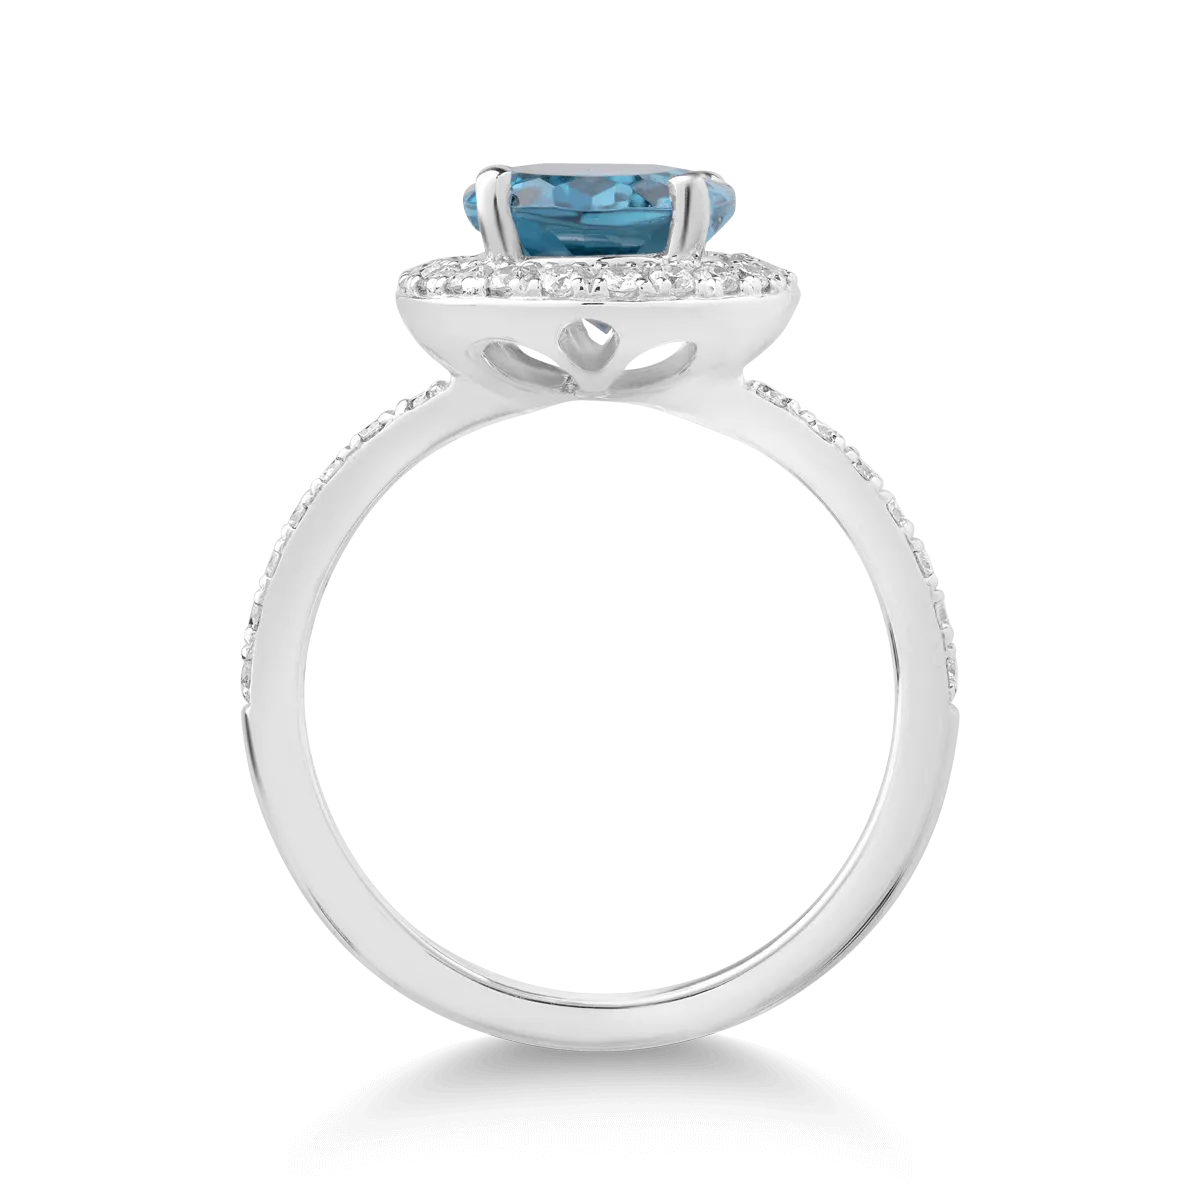 18K white gold ring with 2.25ct London blue topaz and 0.26ct diamonds